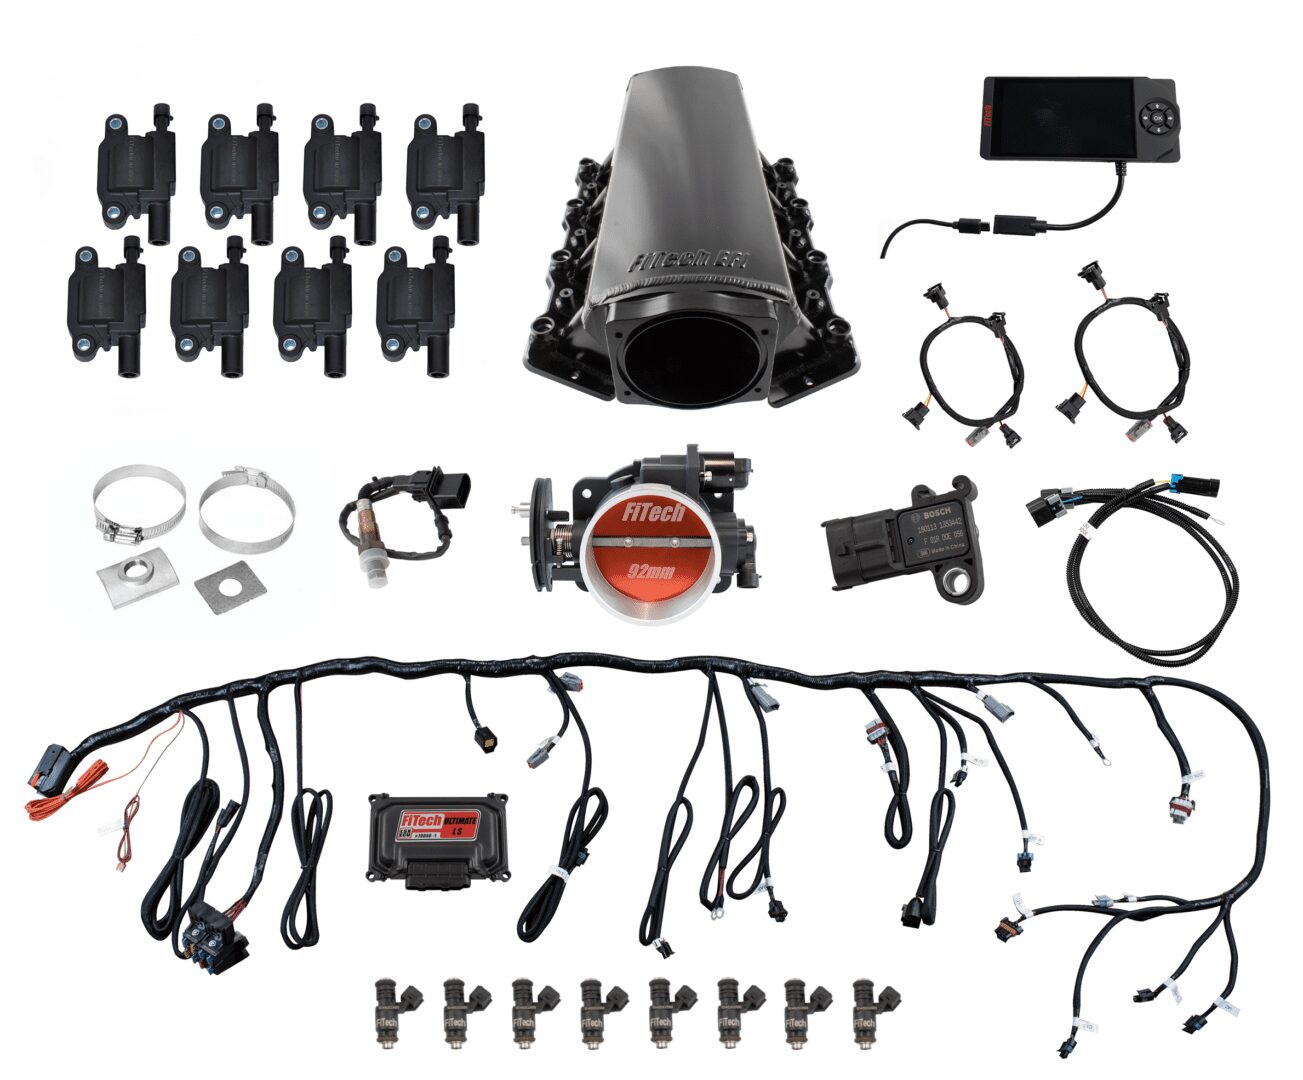 FiTech 78006 Ultimate LS Truck Kit (500 HP/No Trans Control/Tight-Fit In-Tank/Cathedral Port)